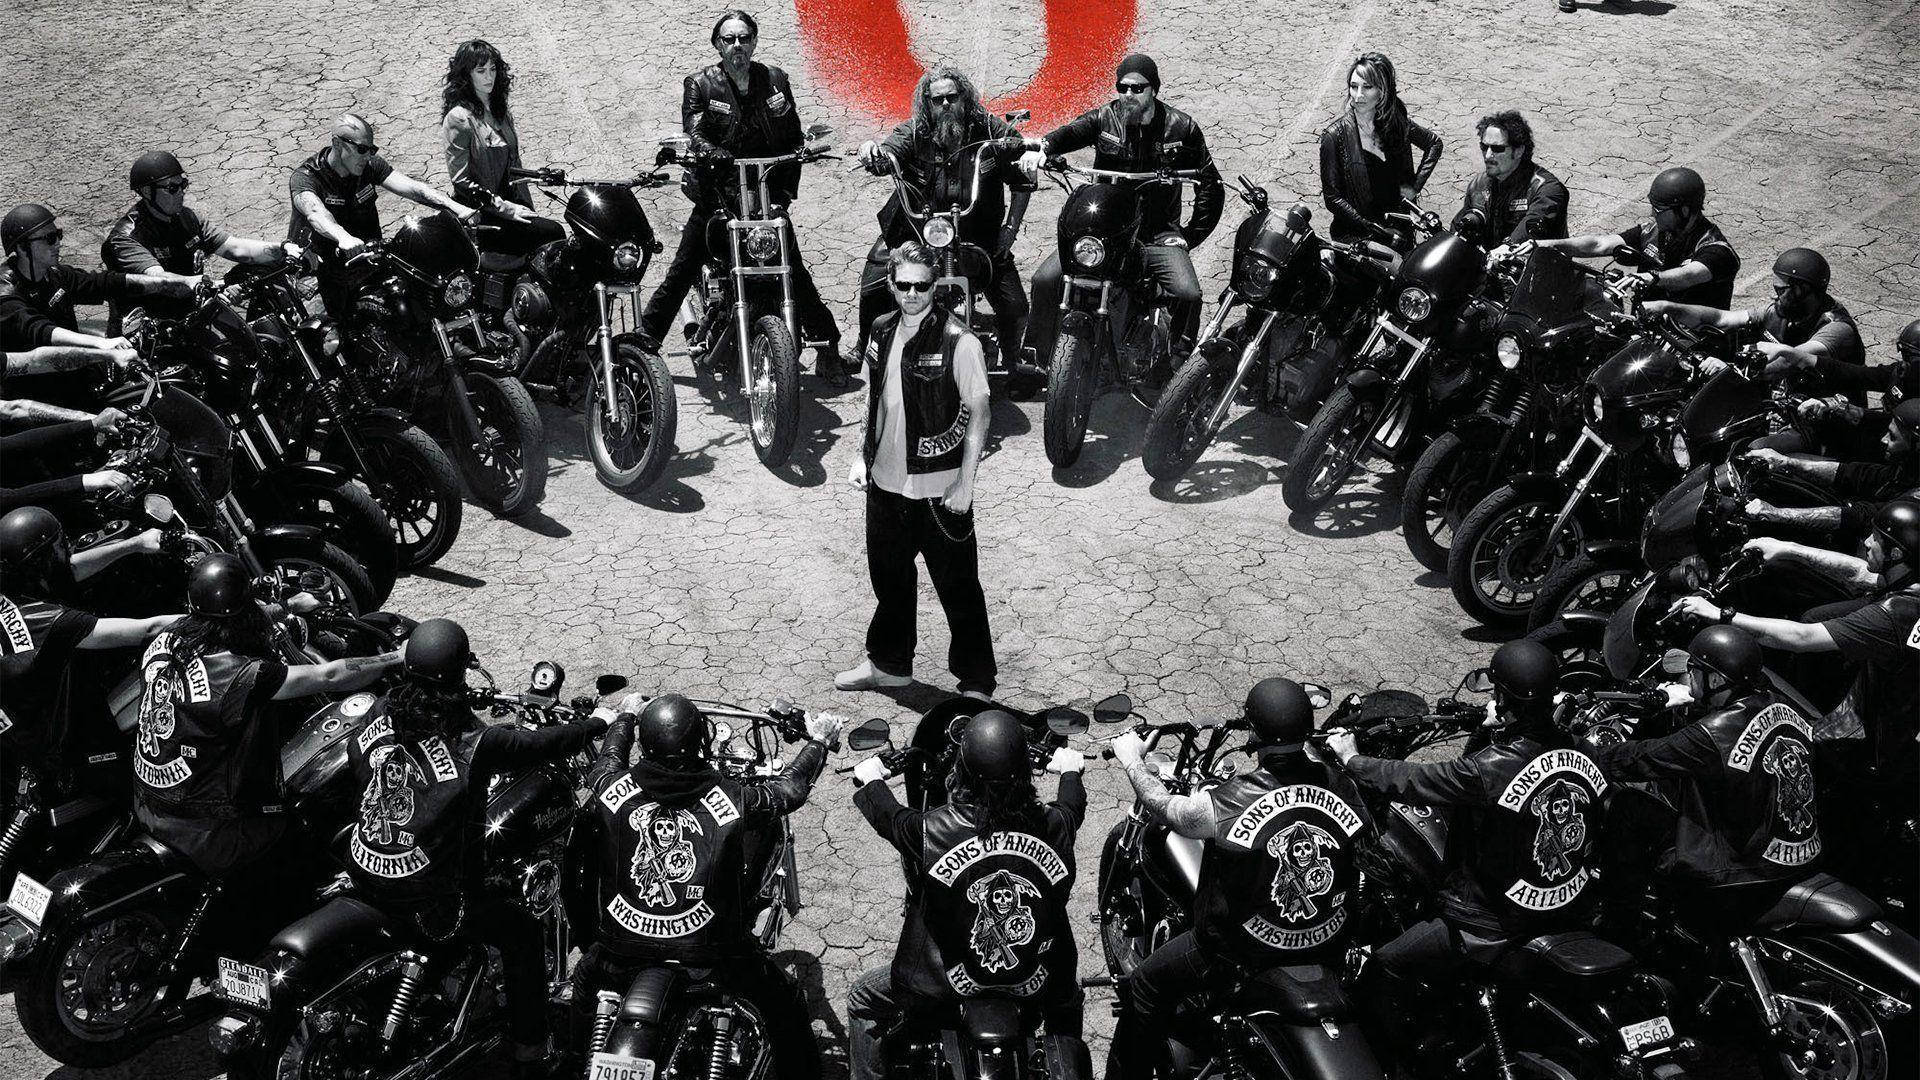  Sons Of Anarchy Hintergrundbild 1920x1080. Download The Sons of Anarchy Ride Together Wallpaper